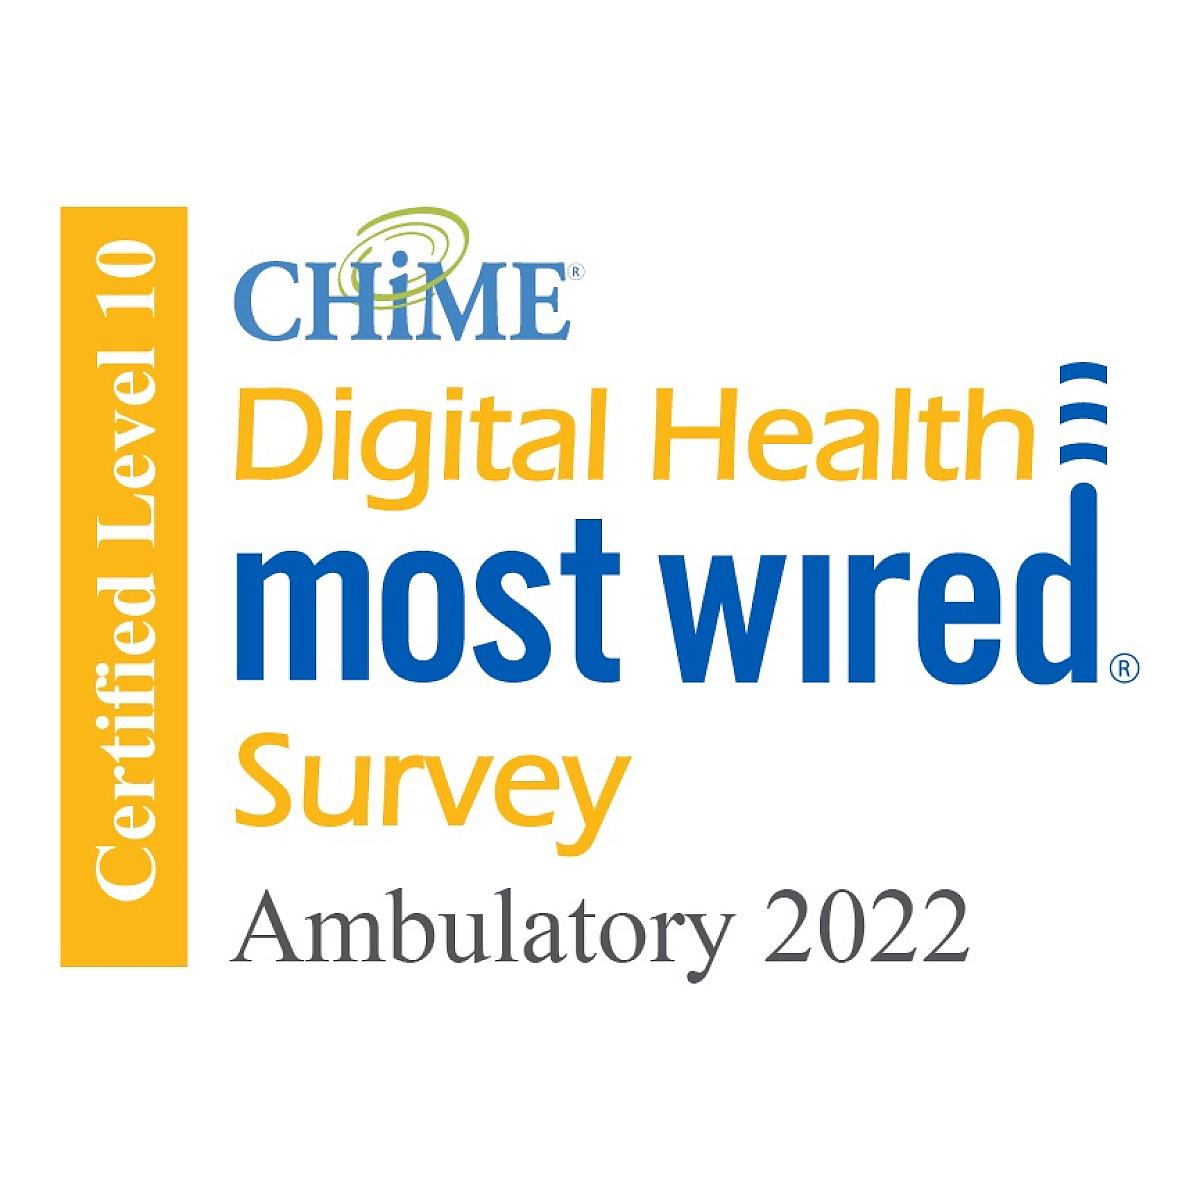 Digital Health Most Wired Survey for Ambulatory Care in 2022 badge